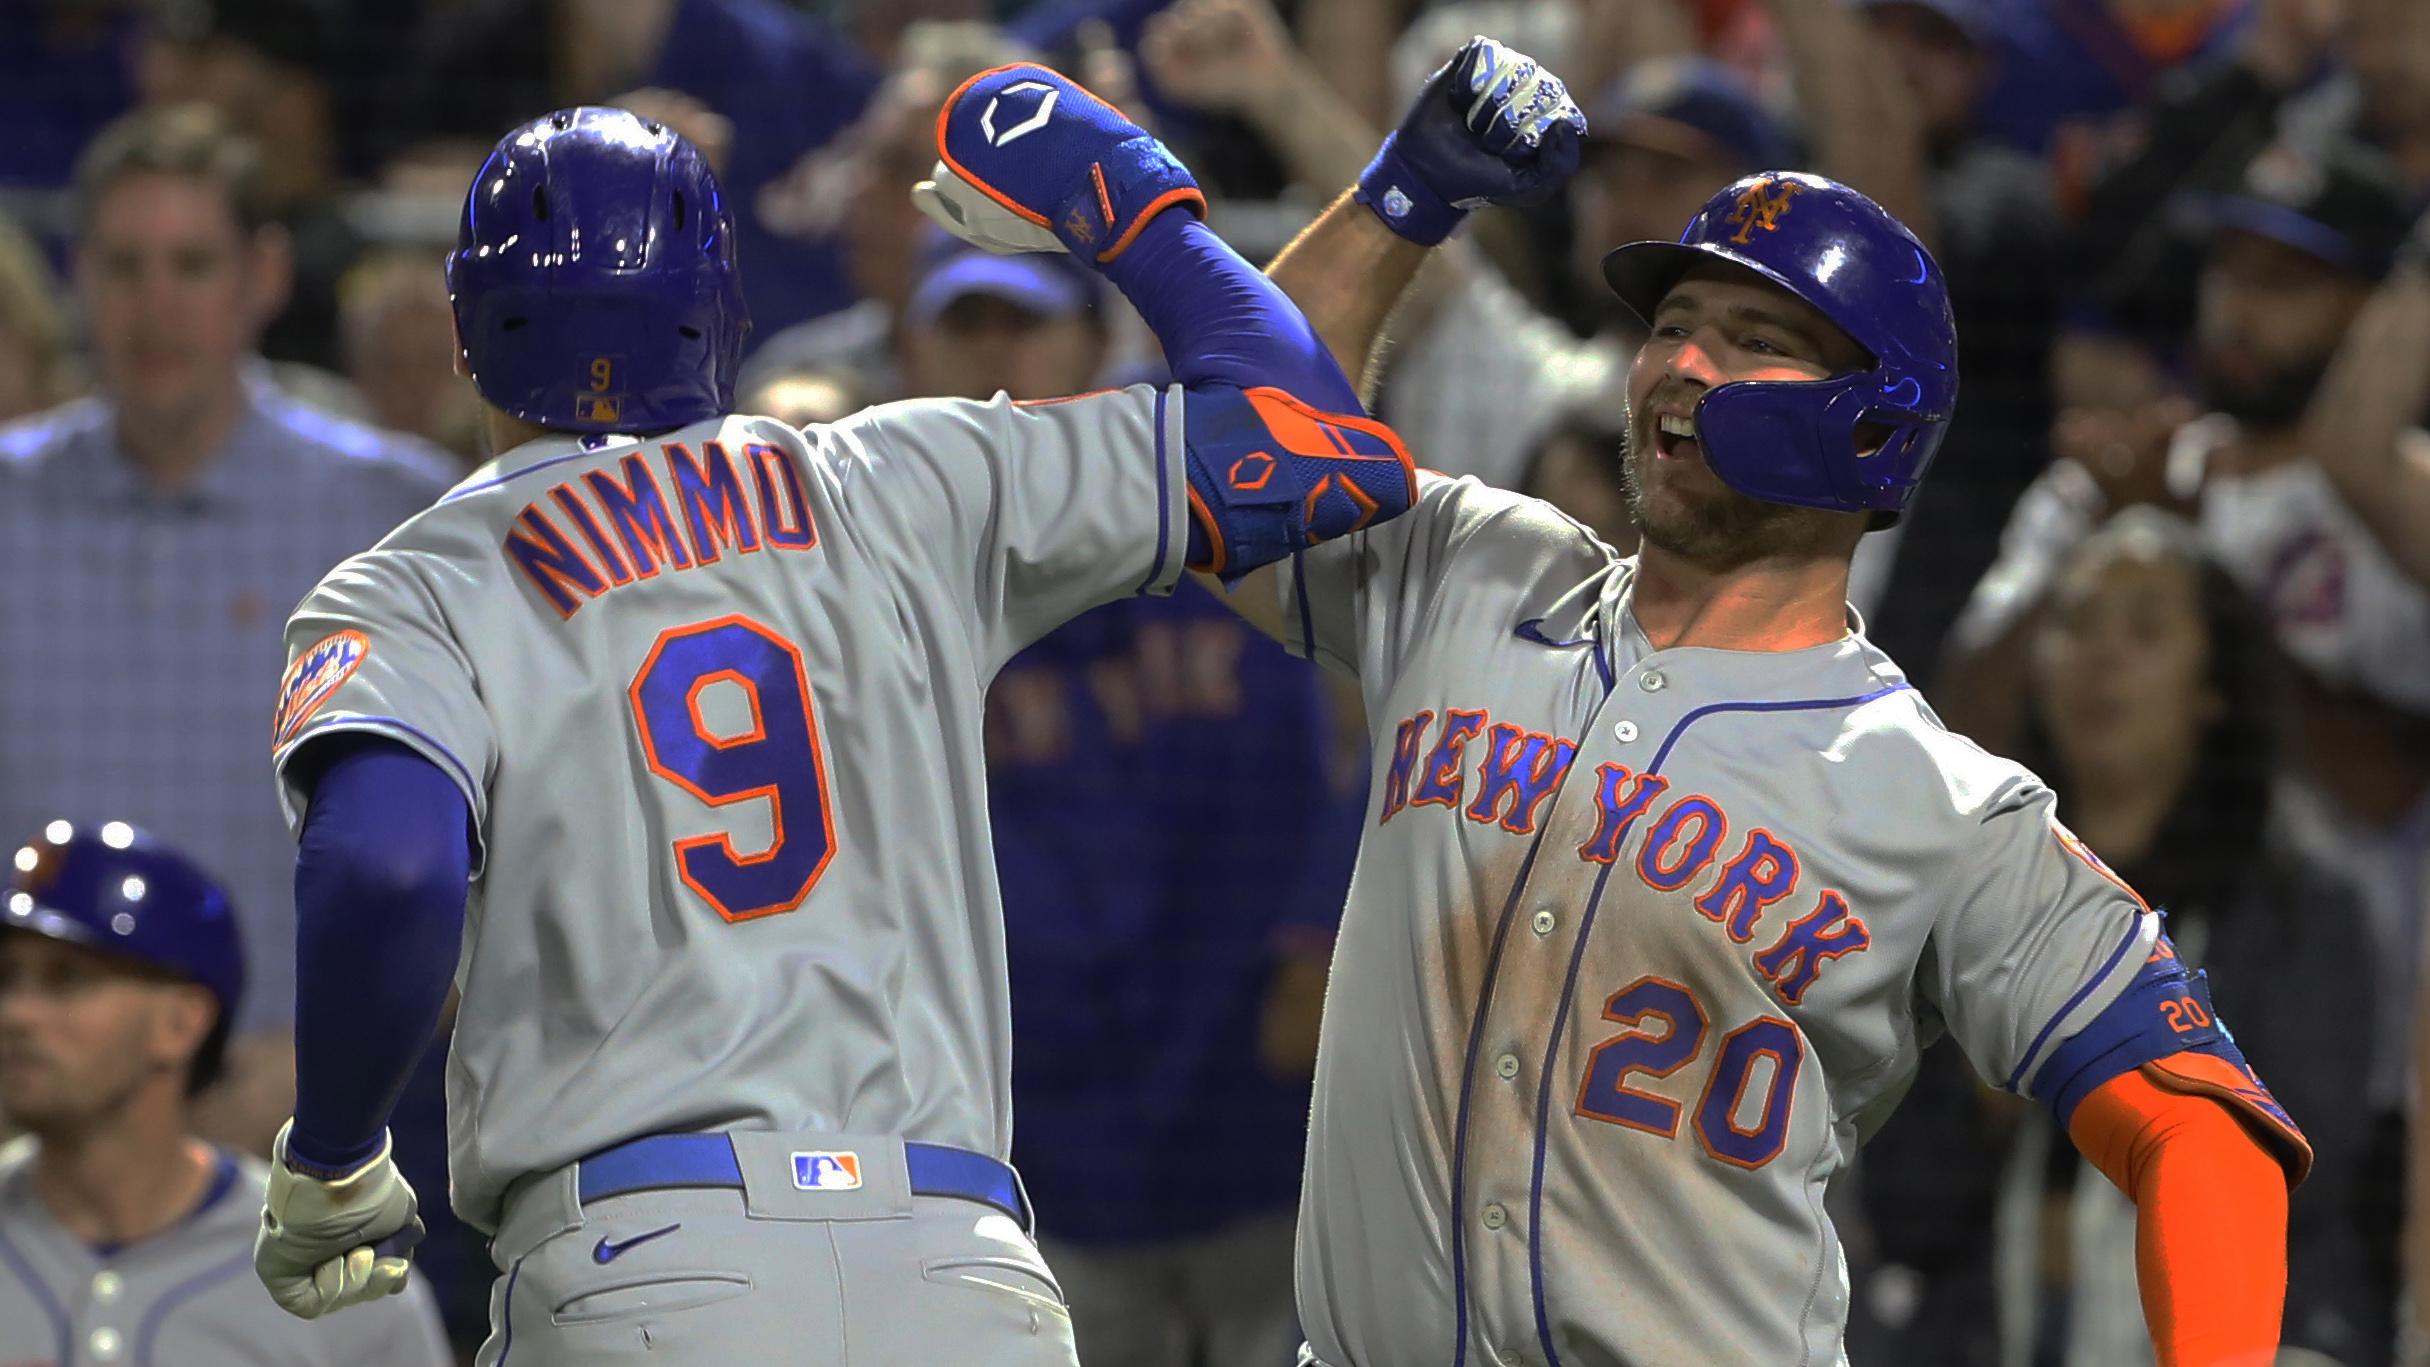 Jul 17, 2021; Pittsburgh, Pennsylvania, USA; New York Mets center fielder Brandon Nimmo (9) celebrates with first baseman Pete Alonso (20) after hitting a solo home run against the Pittsburgh Pirates during the ninth inning at PNC Park. / Charles LeClaire-USA TODAY Sports